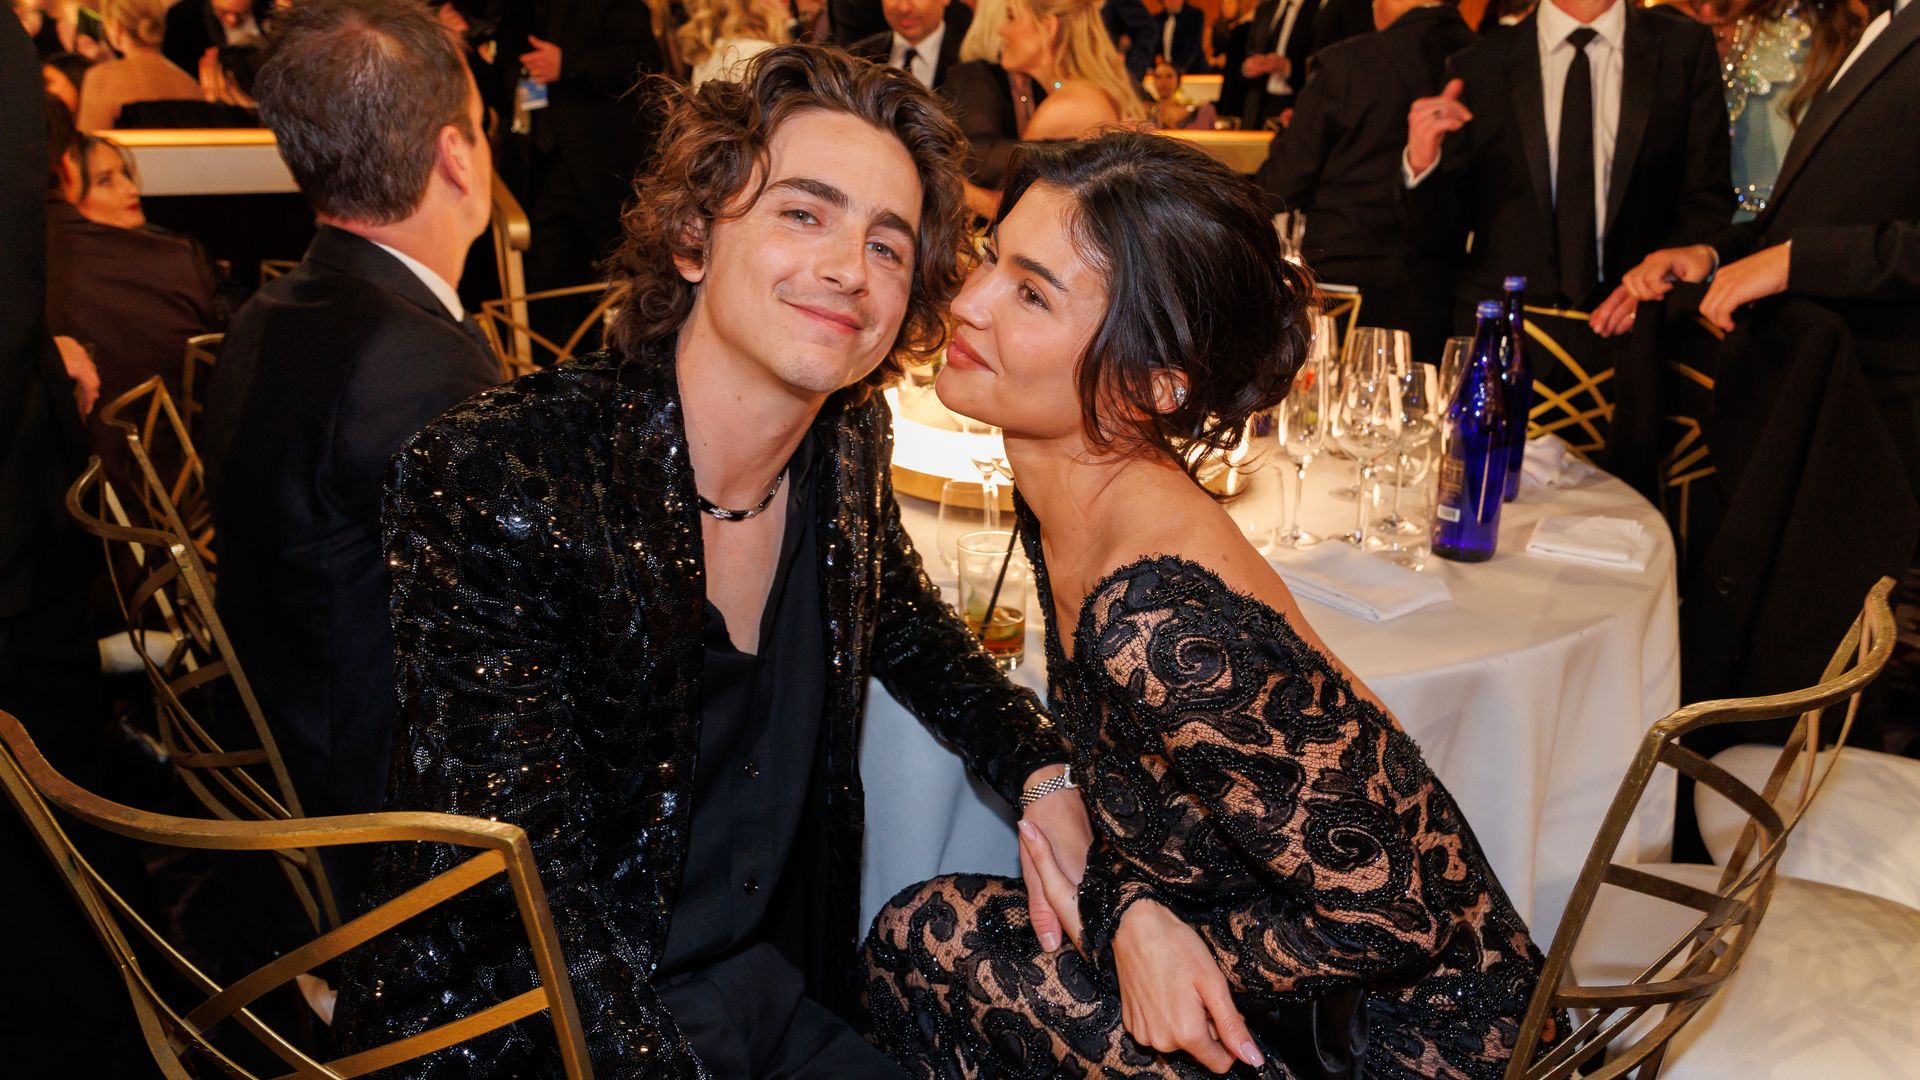 Kylie Jenner and Timothee Chalamet at the golden globes